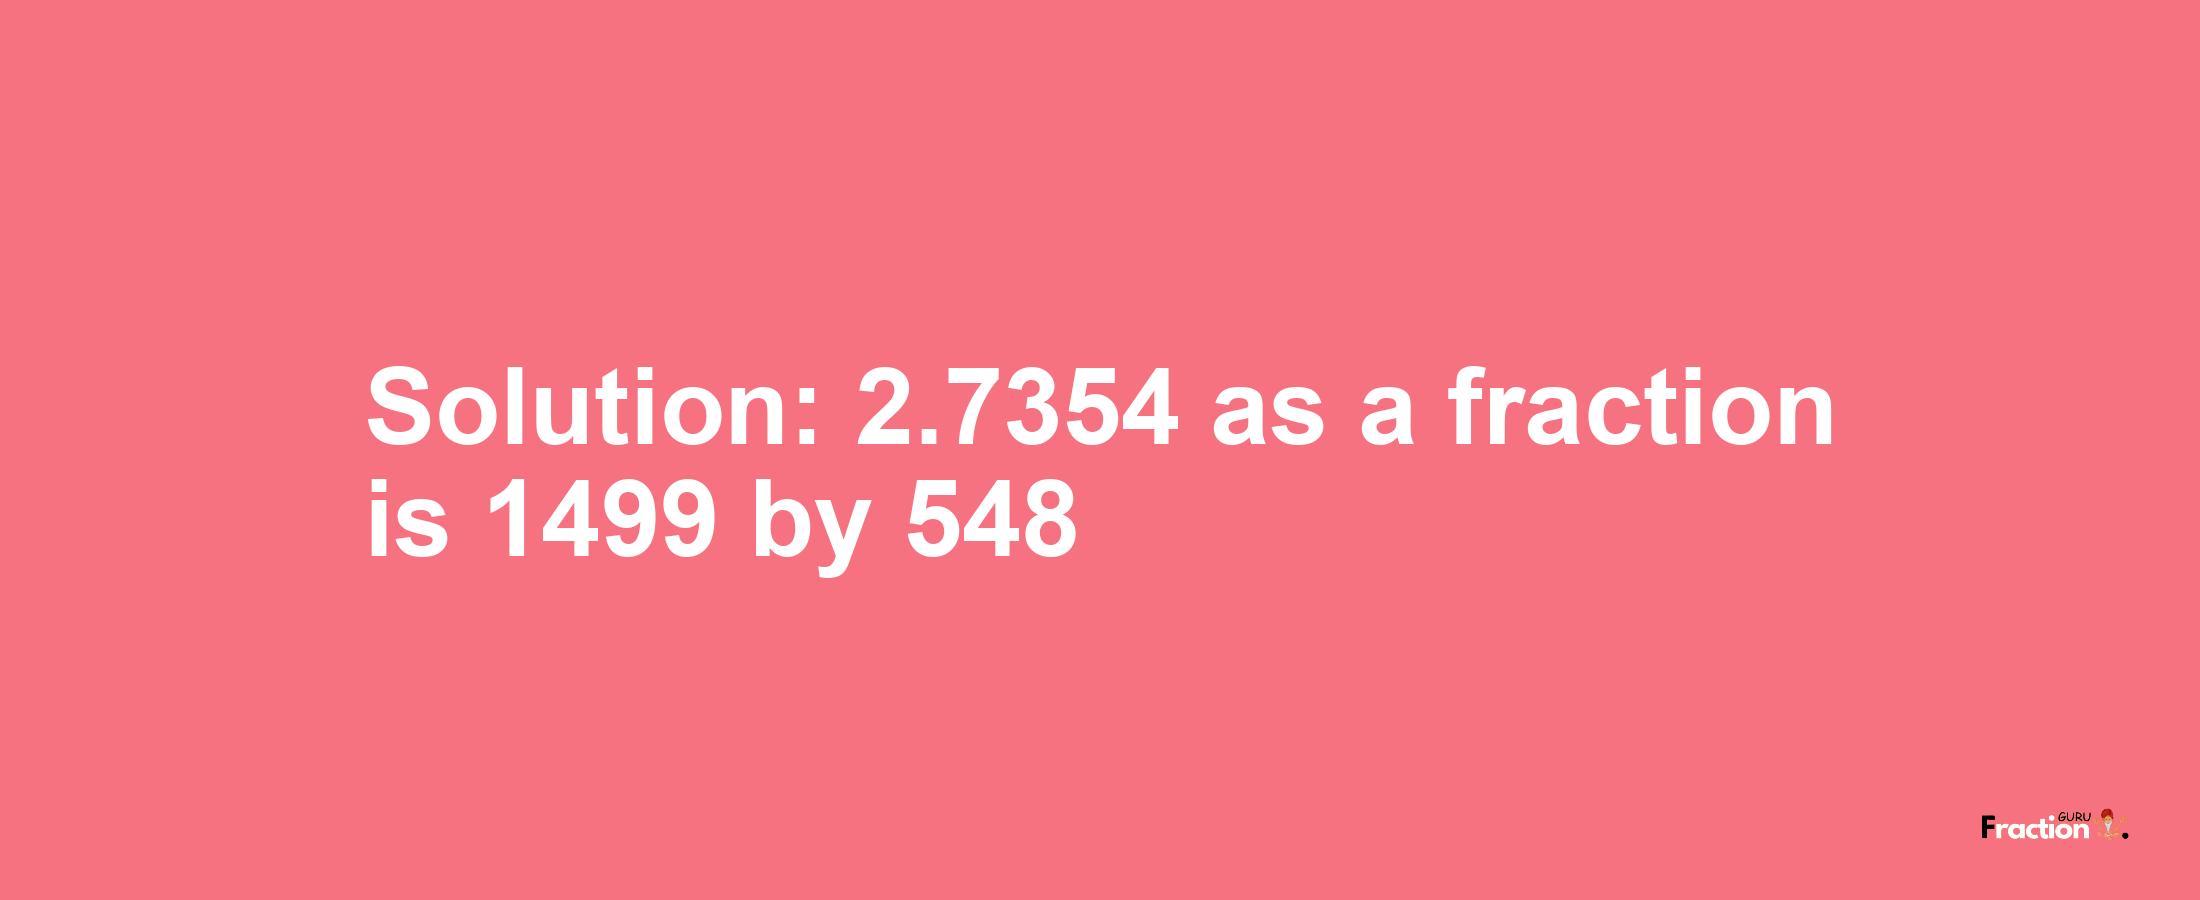 Solution:2.7354 as a fraction is 1499/548